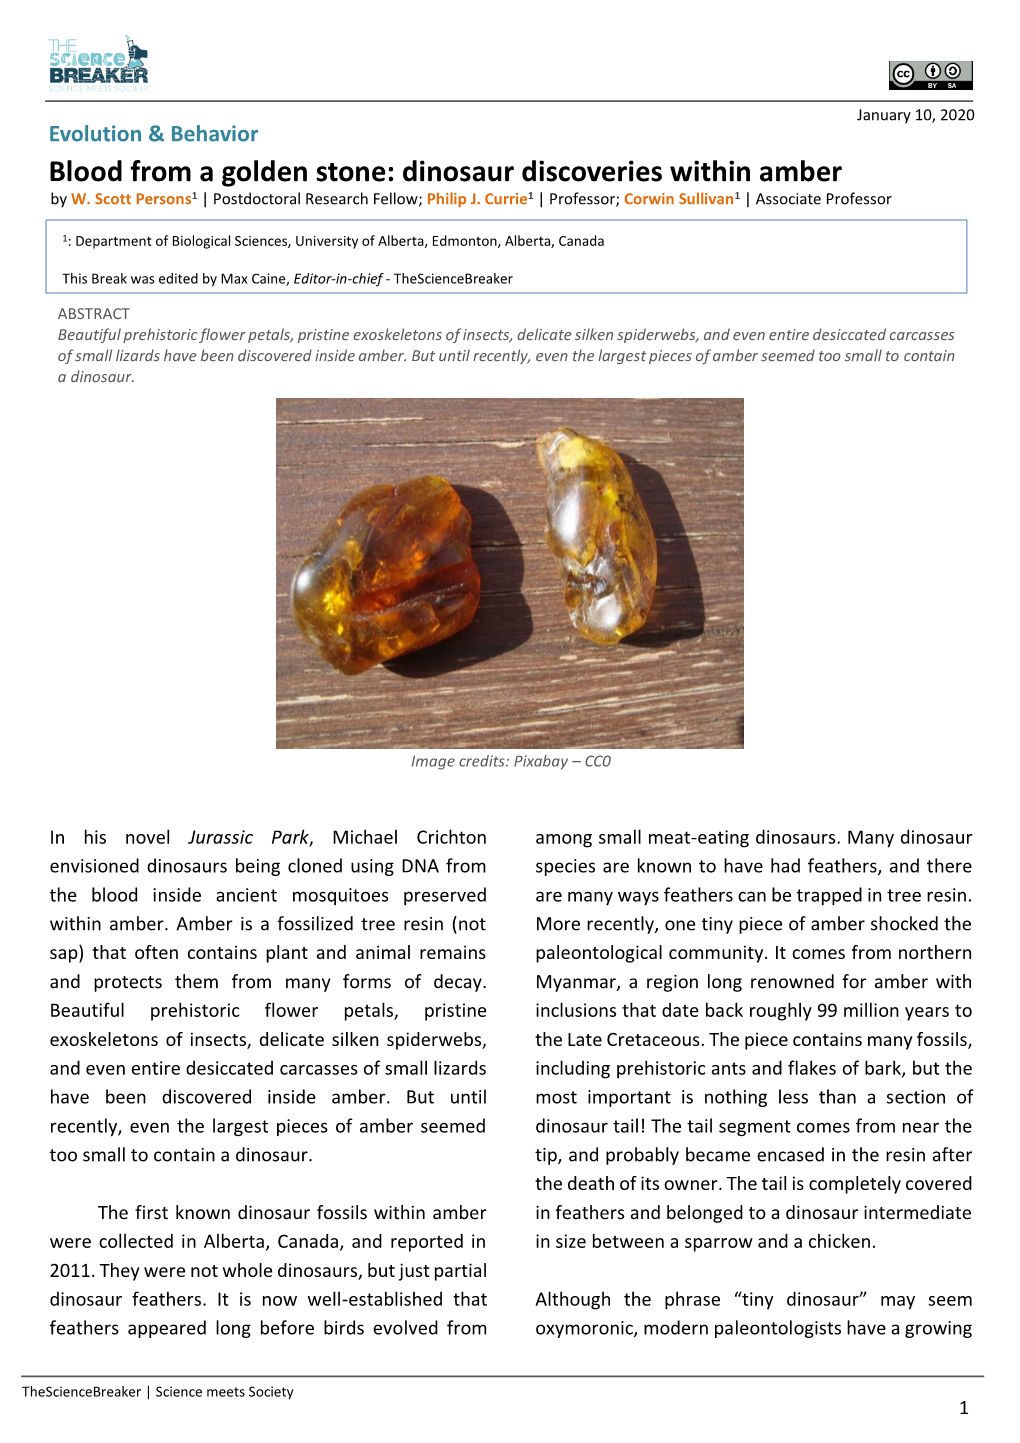 Blood from a Golden Stone: Dinosaur Discoveries Within Amber by W